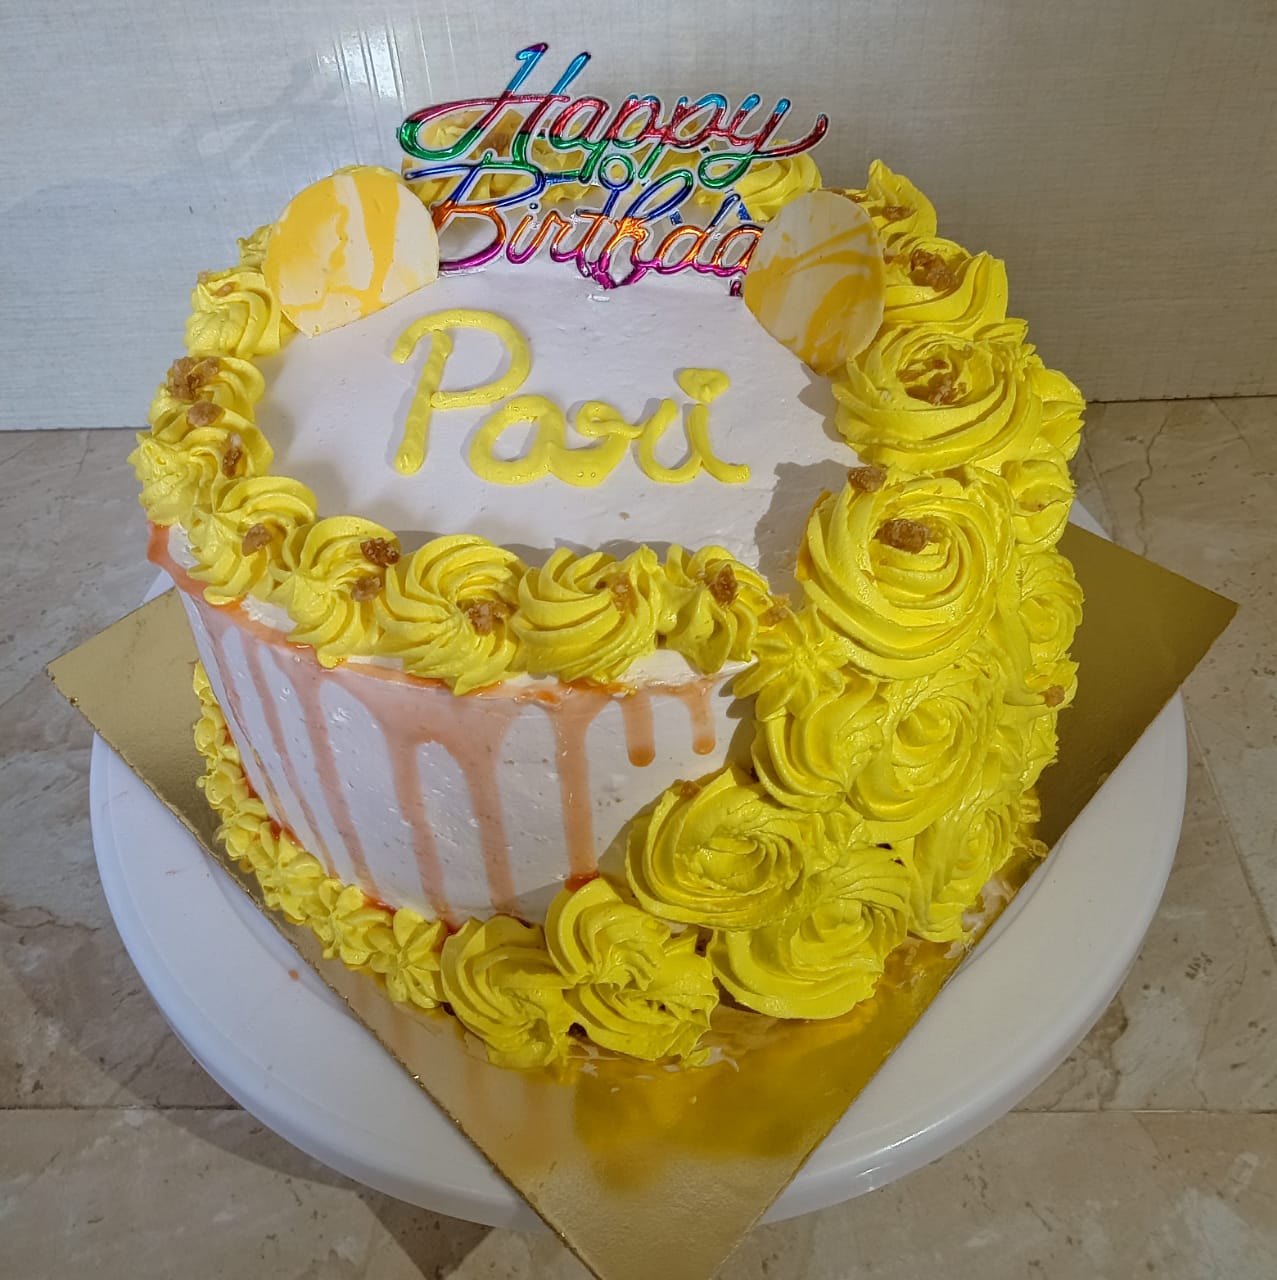 Butterscotch Birthday Cake Designs, Images, Price Near Me